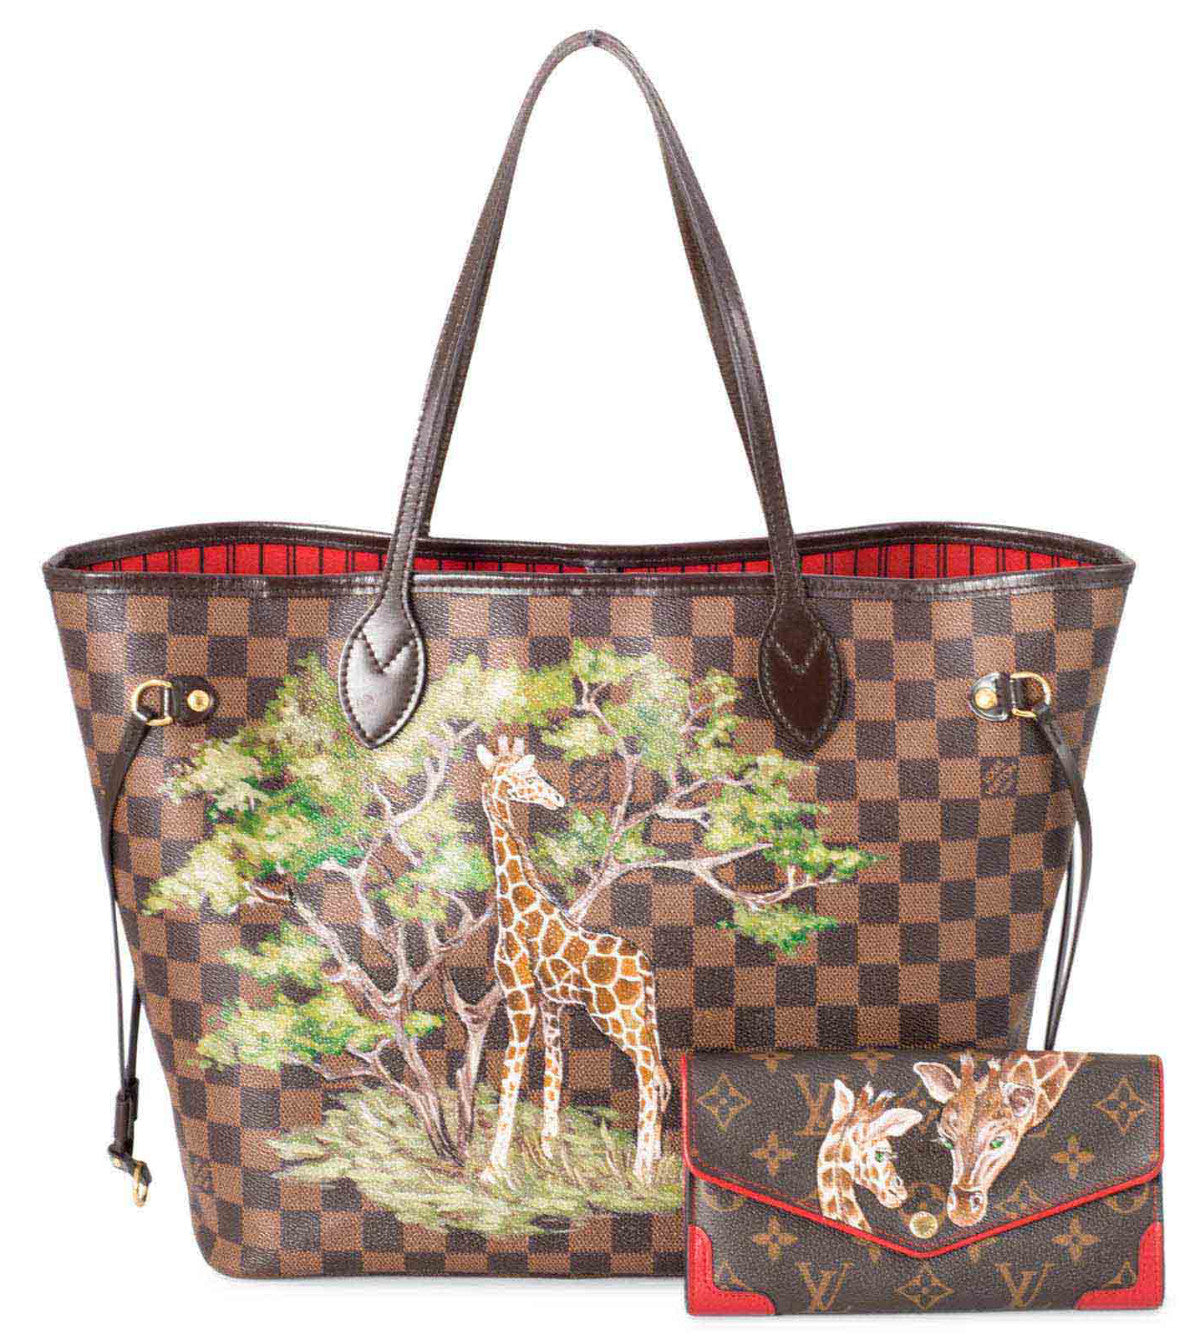 Louis Vuitton Neverfull Bag Archives - Lake Diary